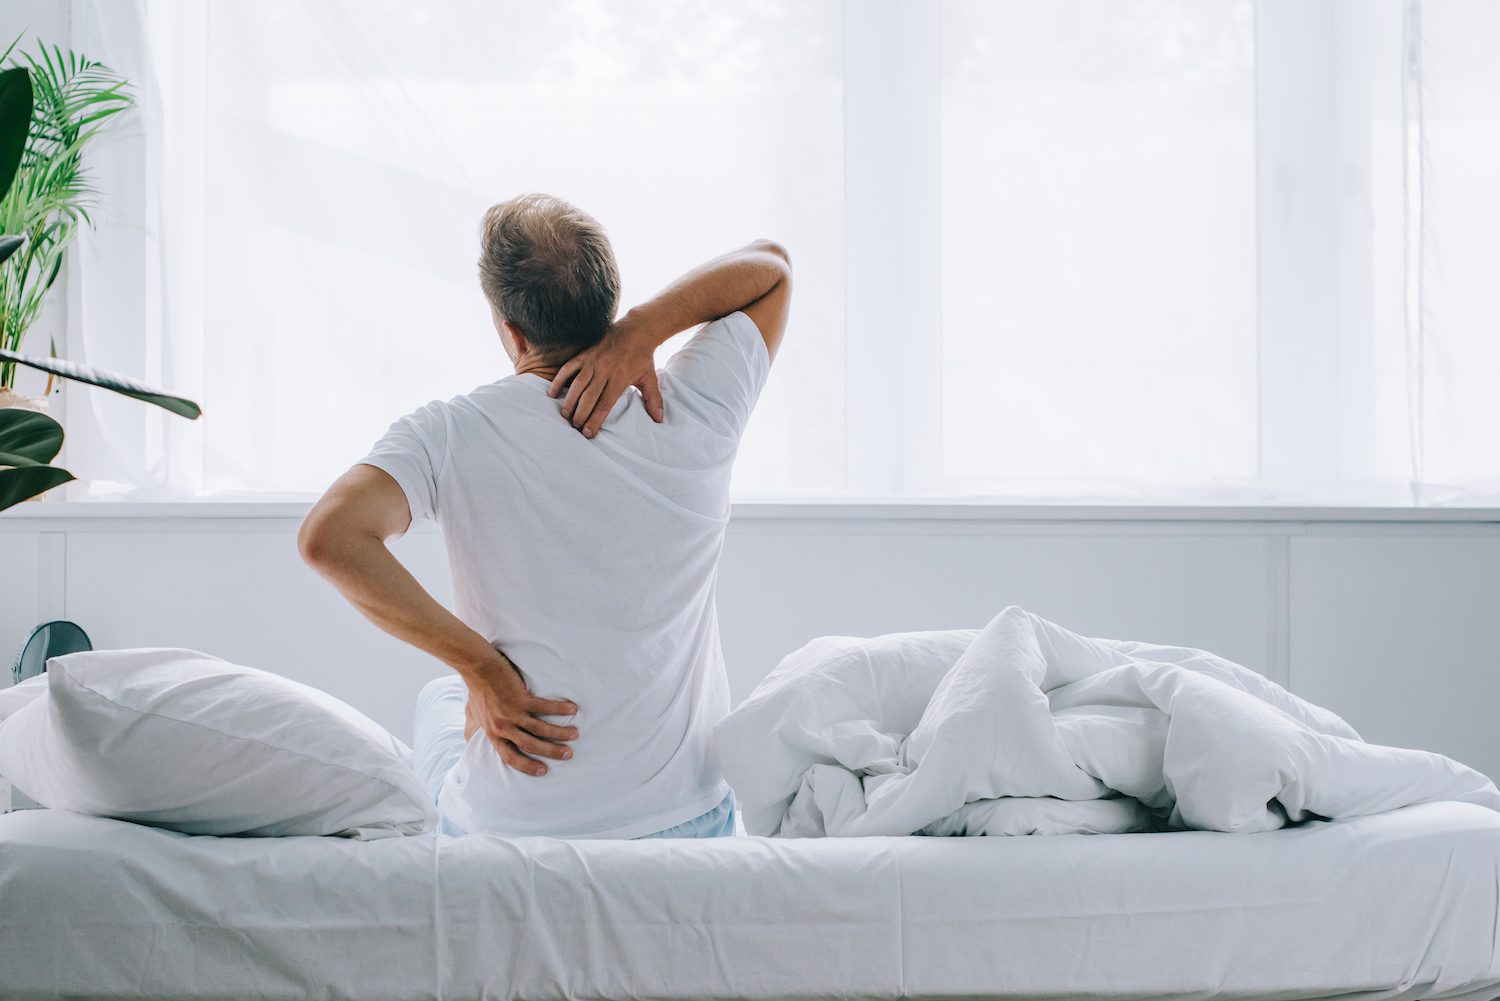 https://www.sleepfoundation.org/wp-content/uploads/2021/07/Waking-Up-With-Lower-Back-Pain.jpg